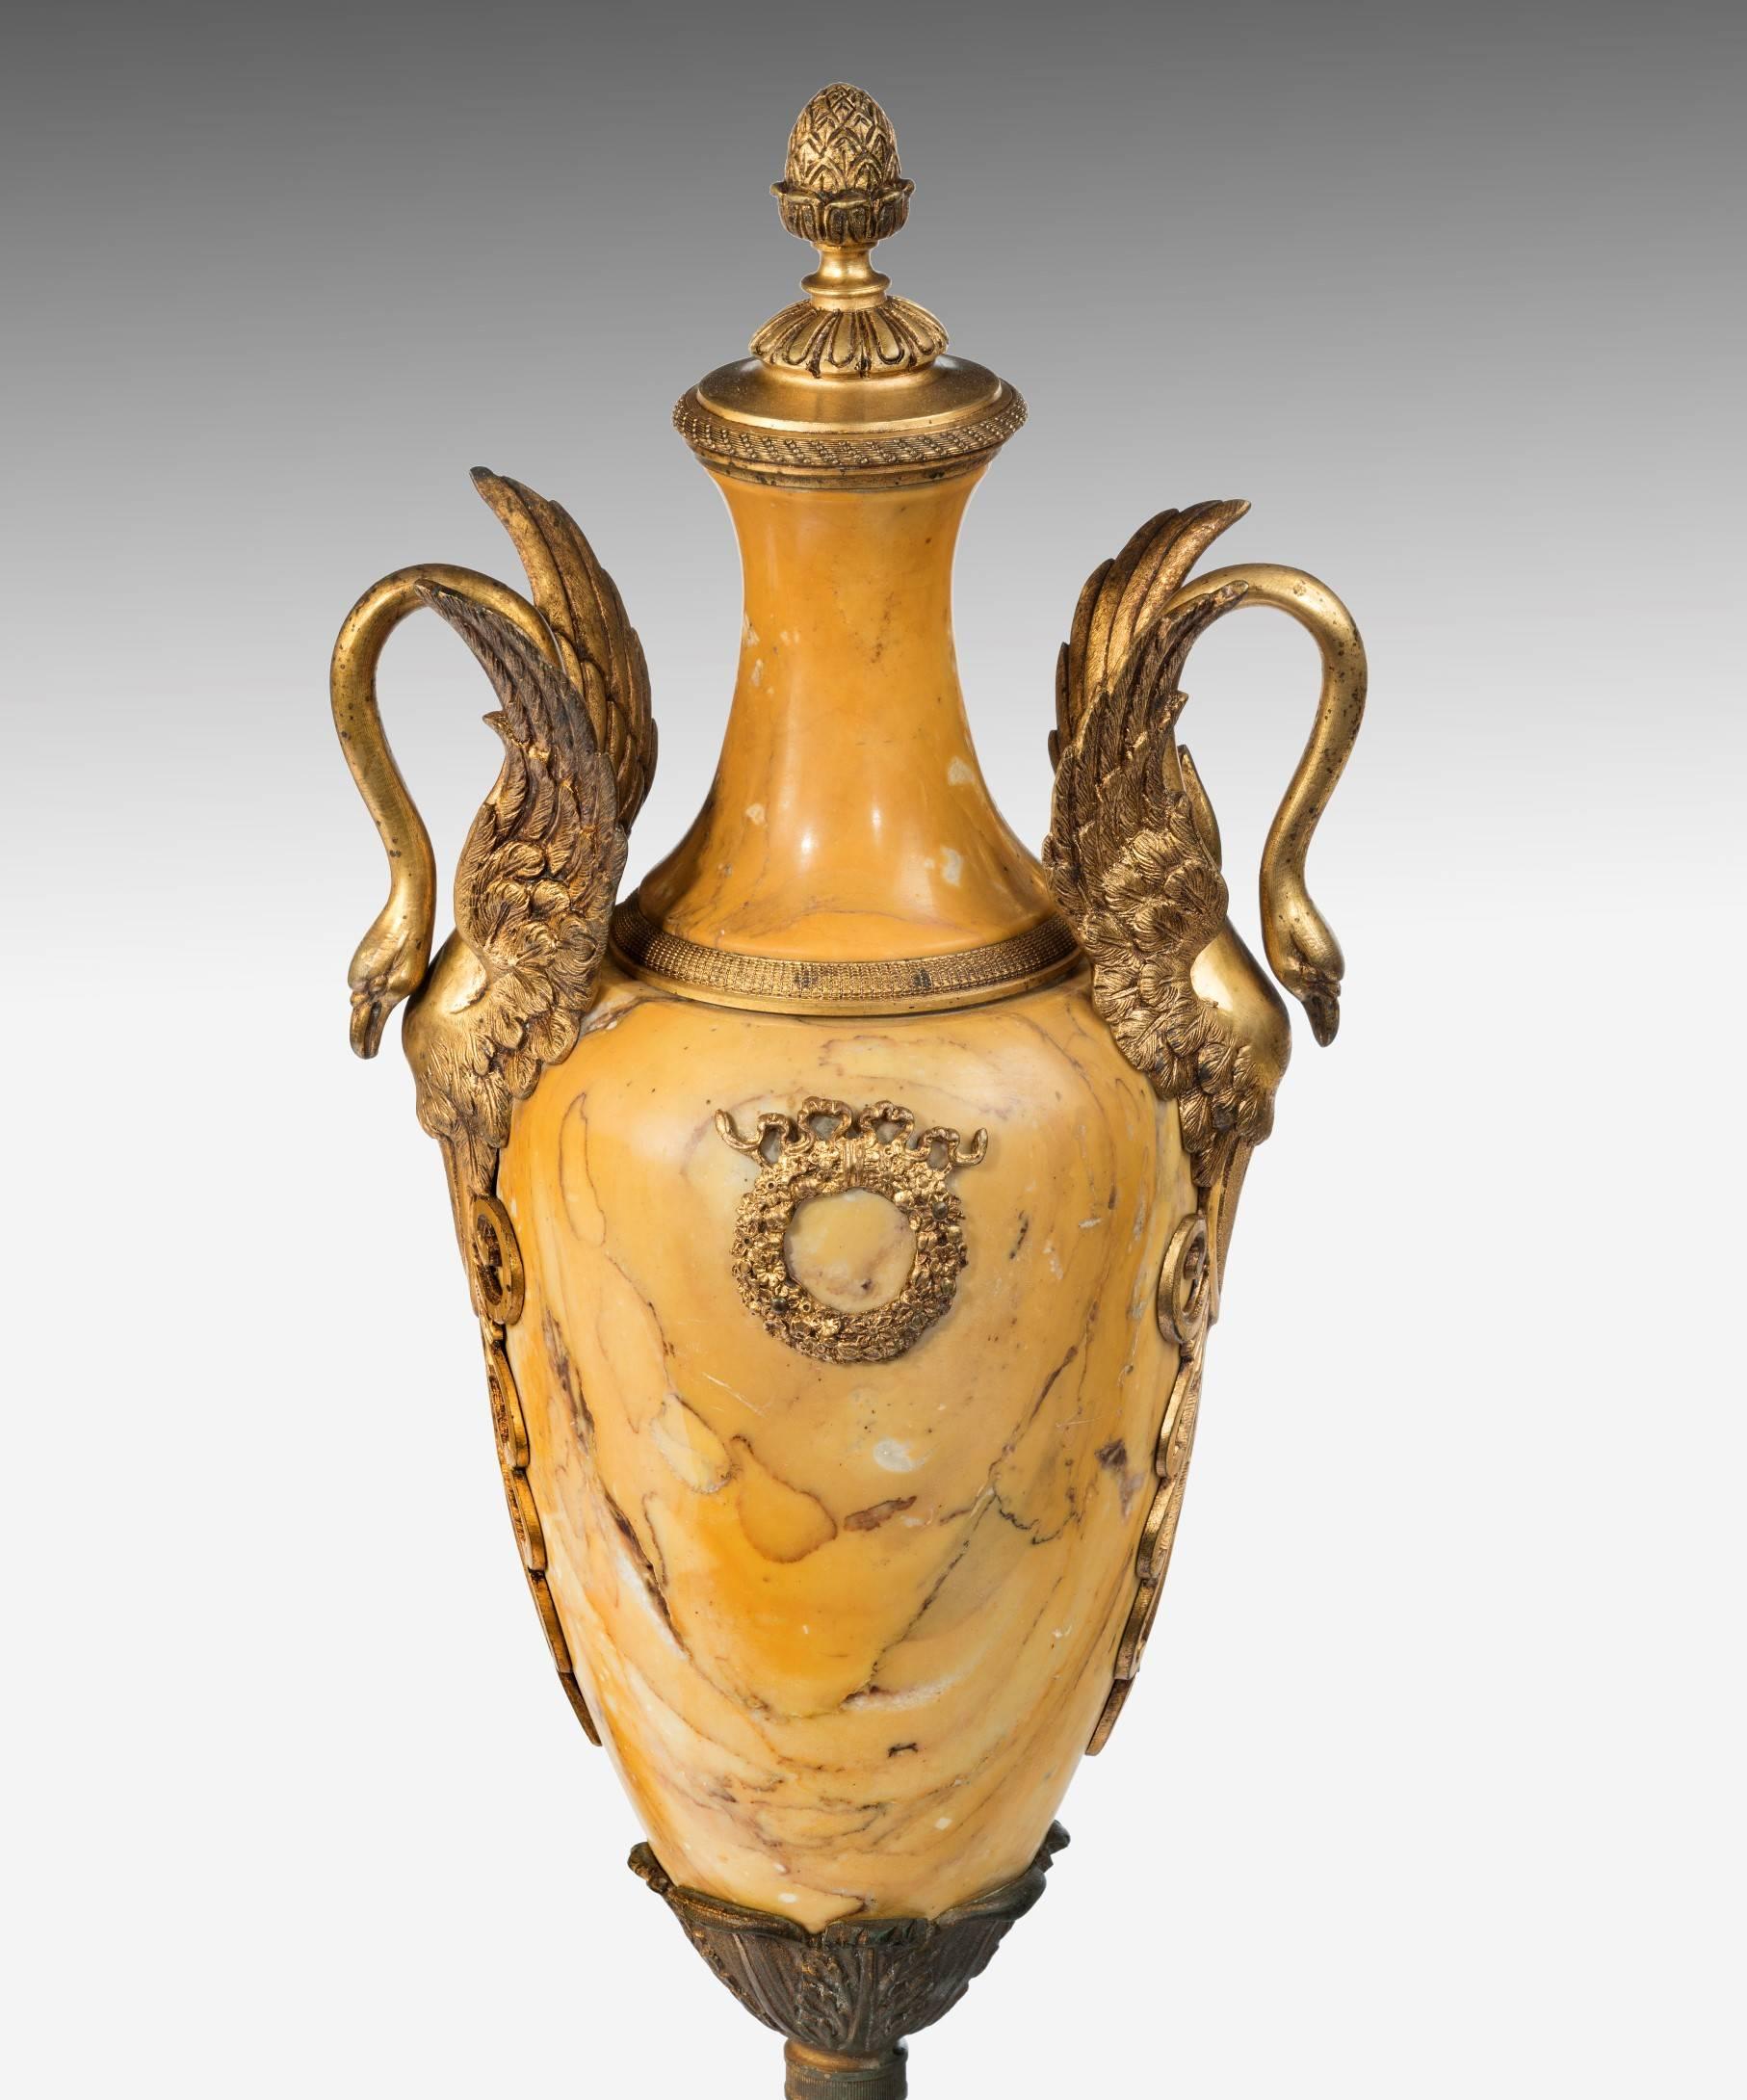 French Pair of Marble and Ormolu Vases from the 19th Century For Sale